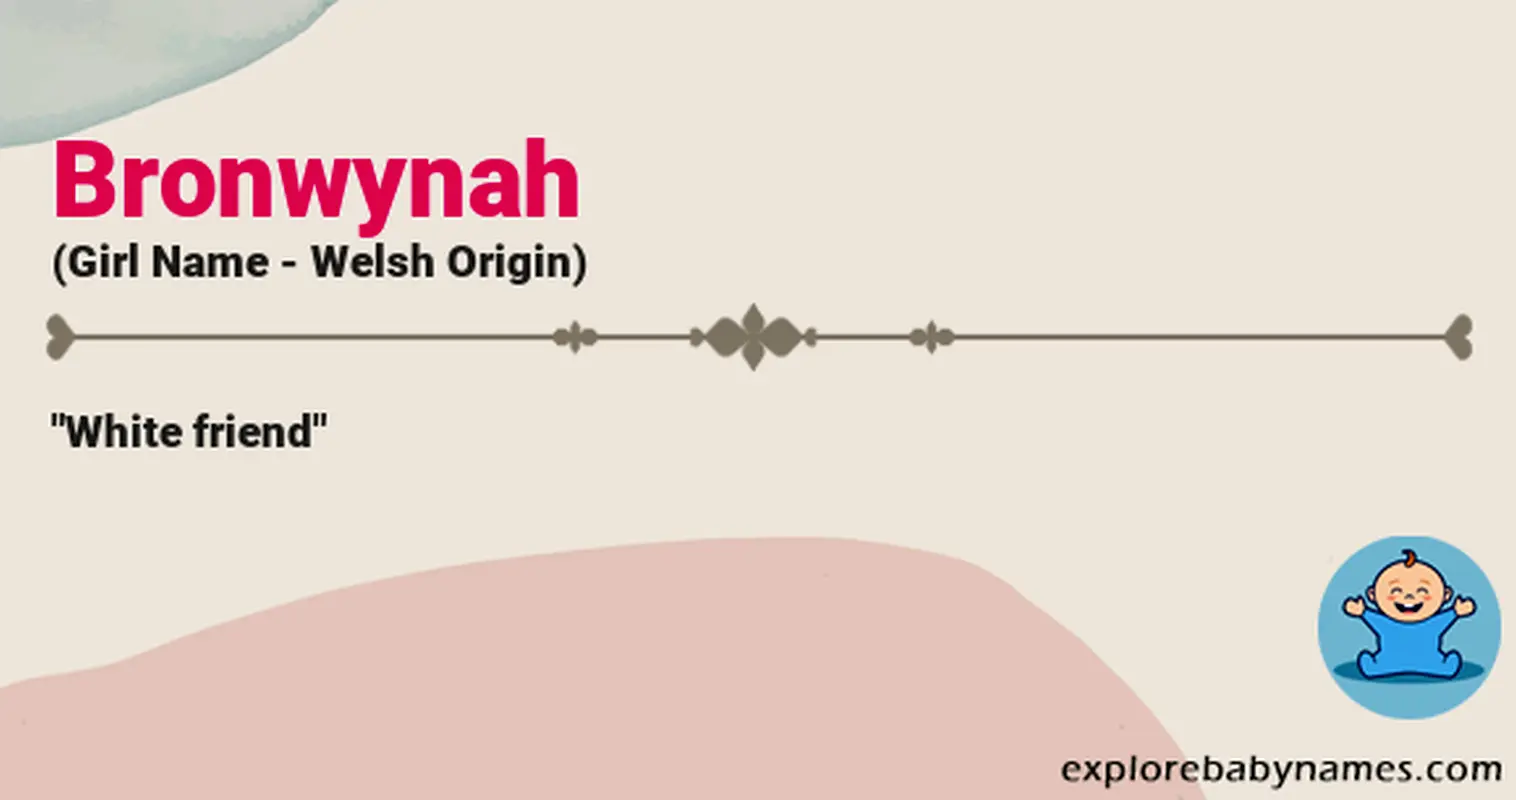 Meaning of Bronwynah